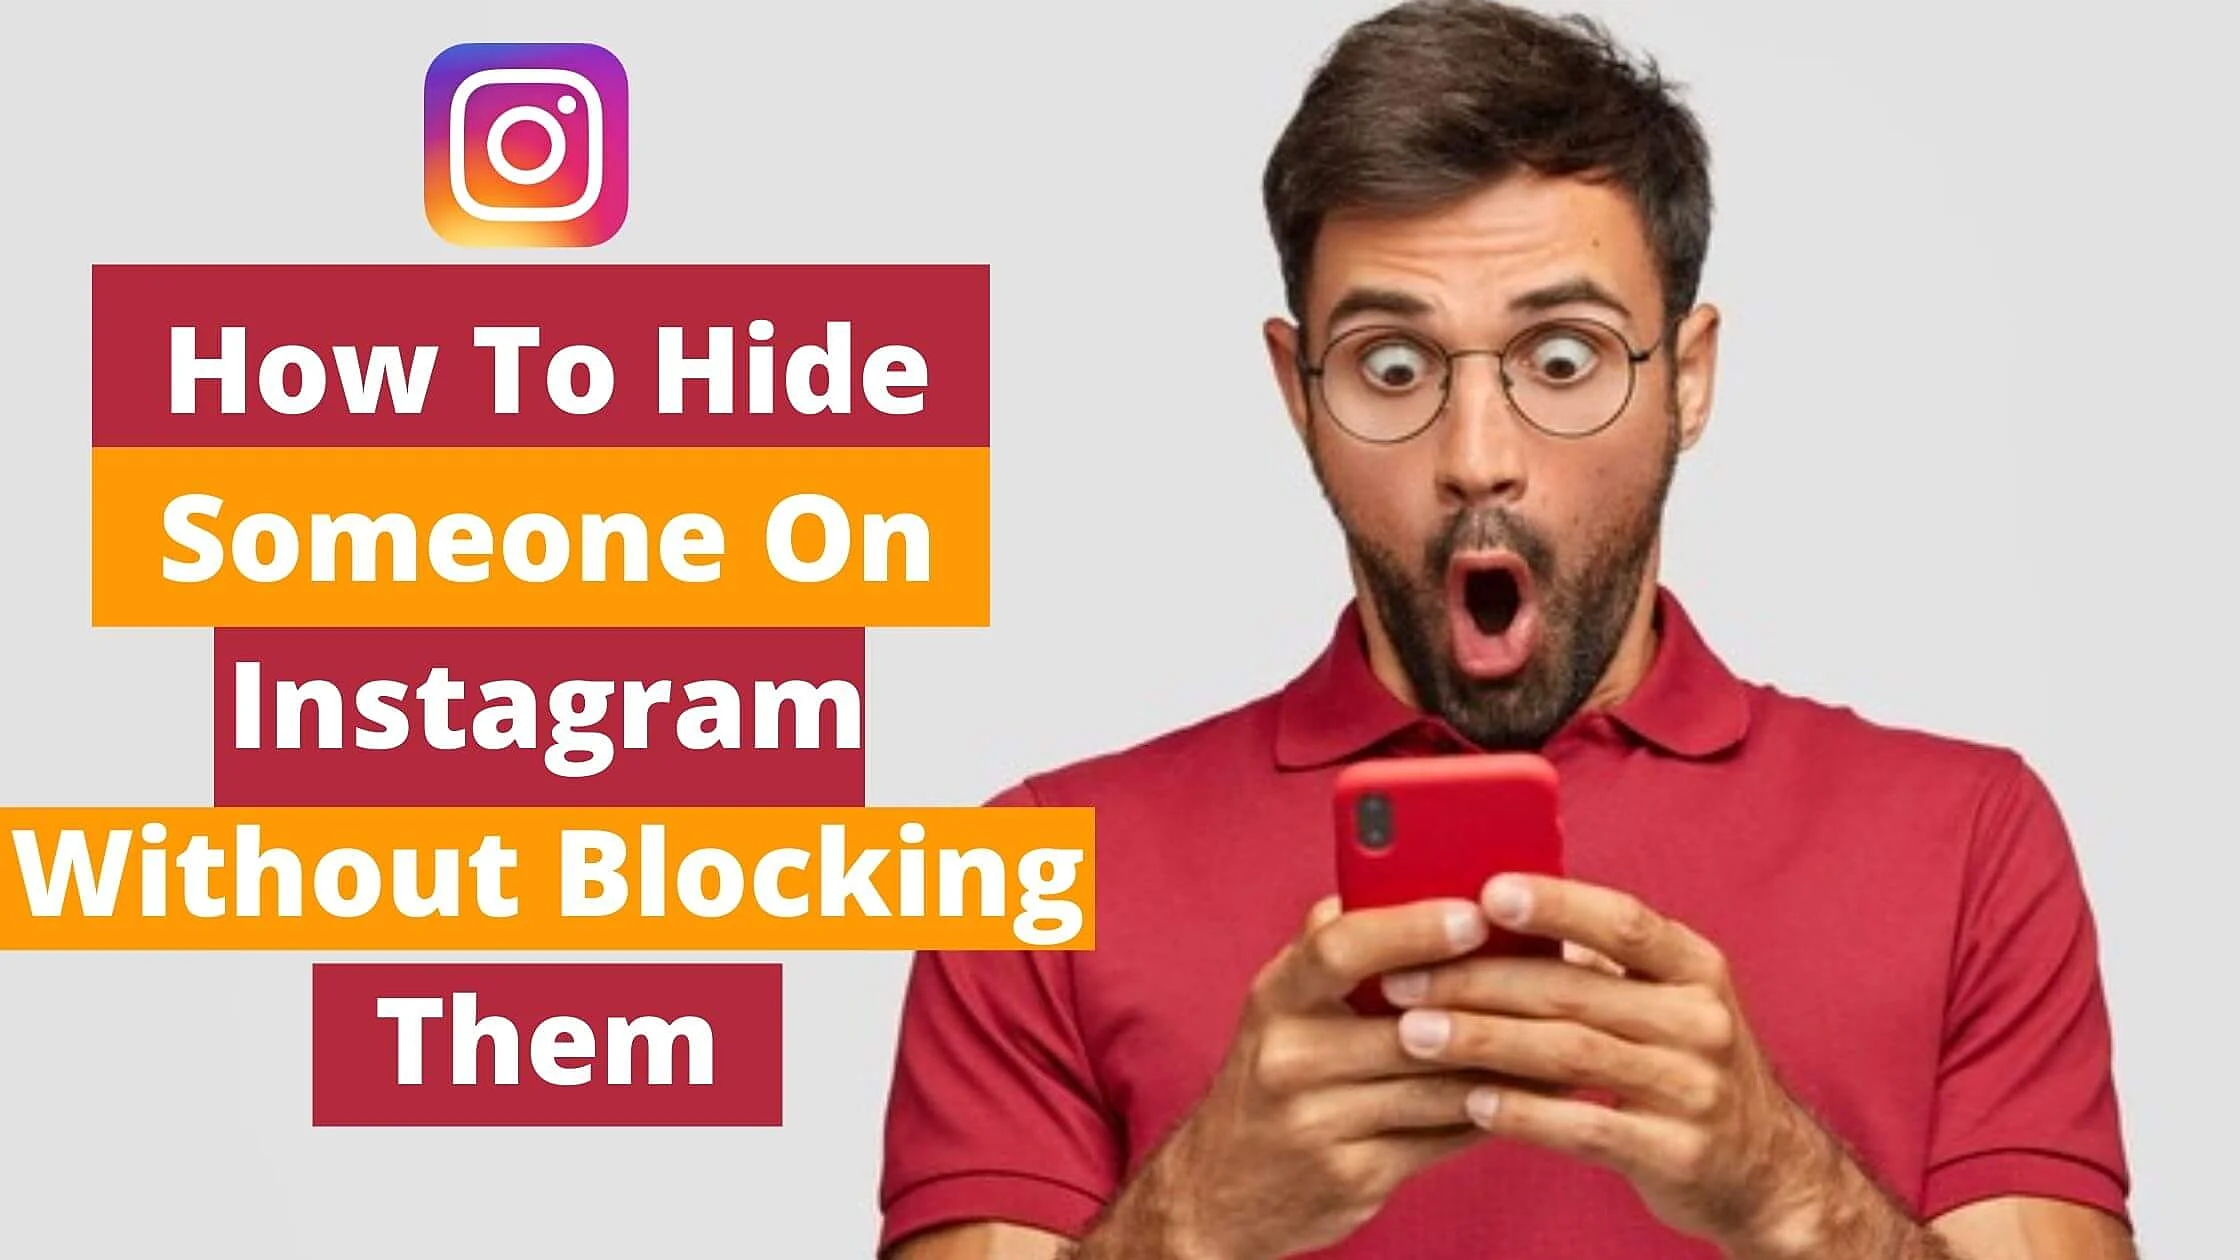 How To Hide Someone On Instagram Without Blocking Them